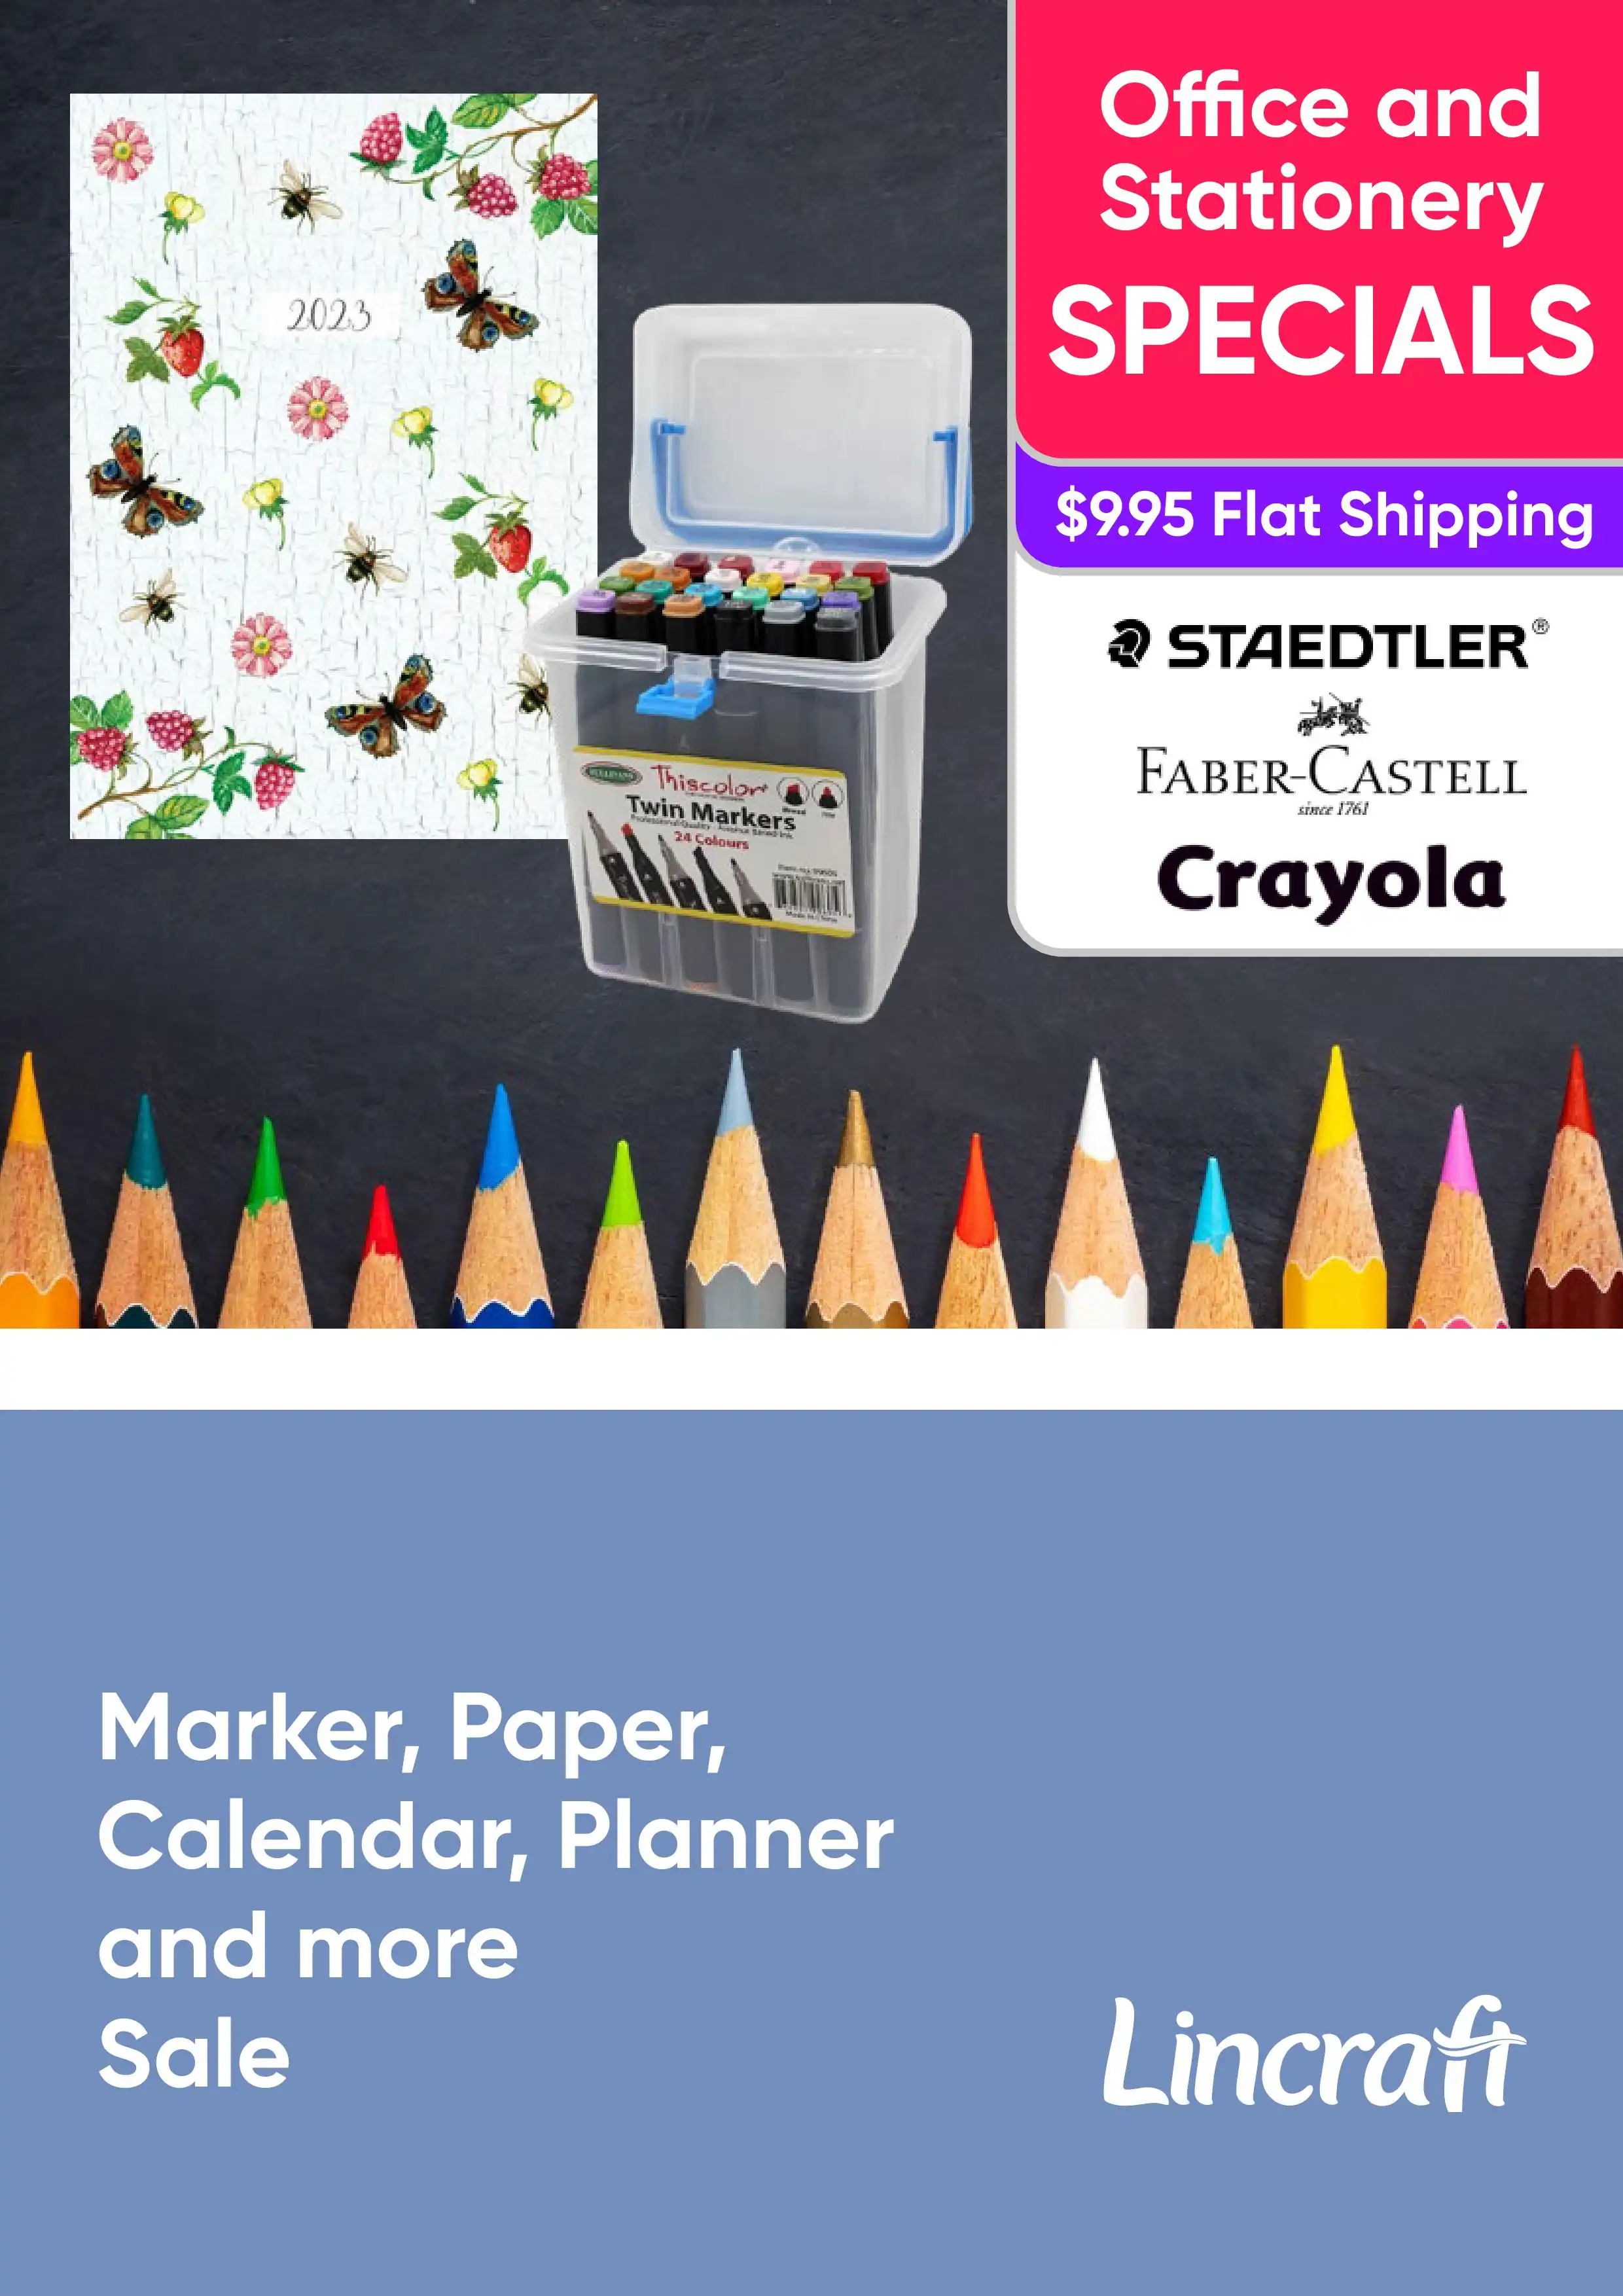 Office and Stationery Specials - Marker, Paper, Calendar, Planner and More - FolkArt, Crayola